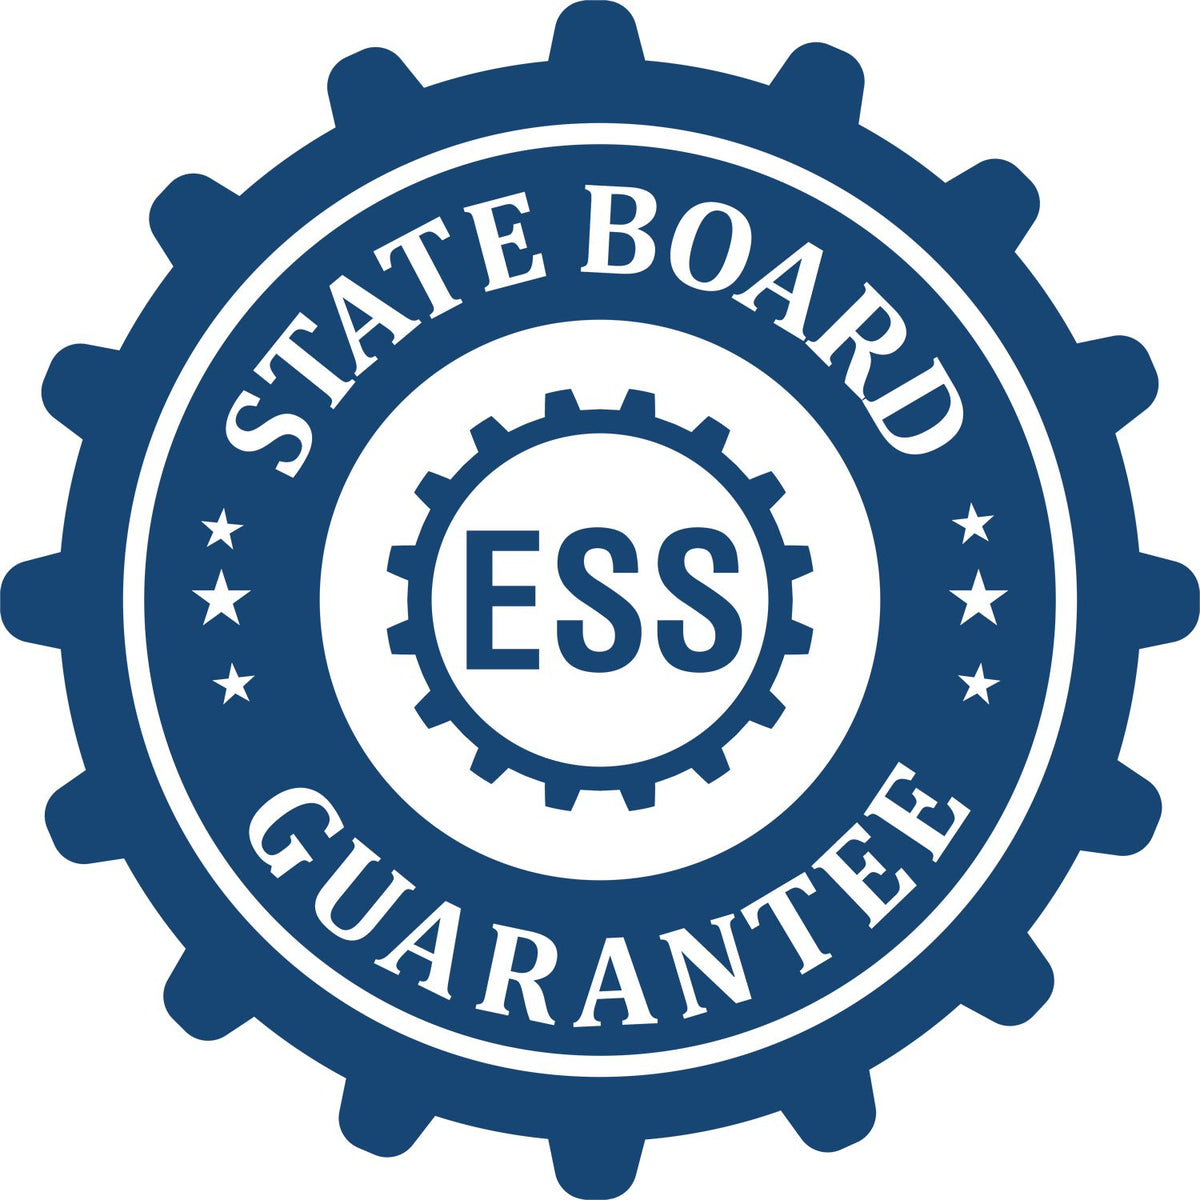 An emblem in a gear shape illustrating a state board guarantee for the Georgia Professional Engineer Seal Stamp product.